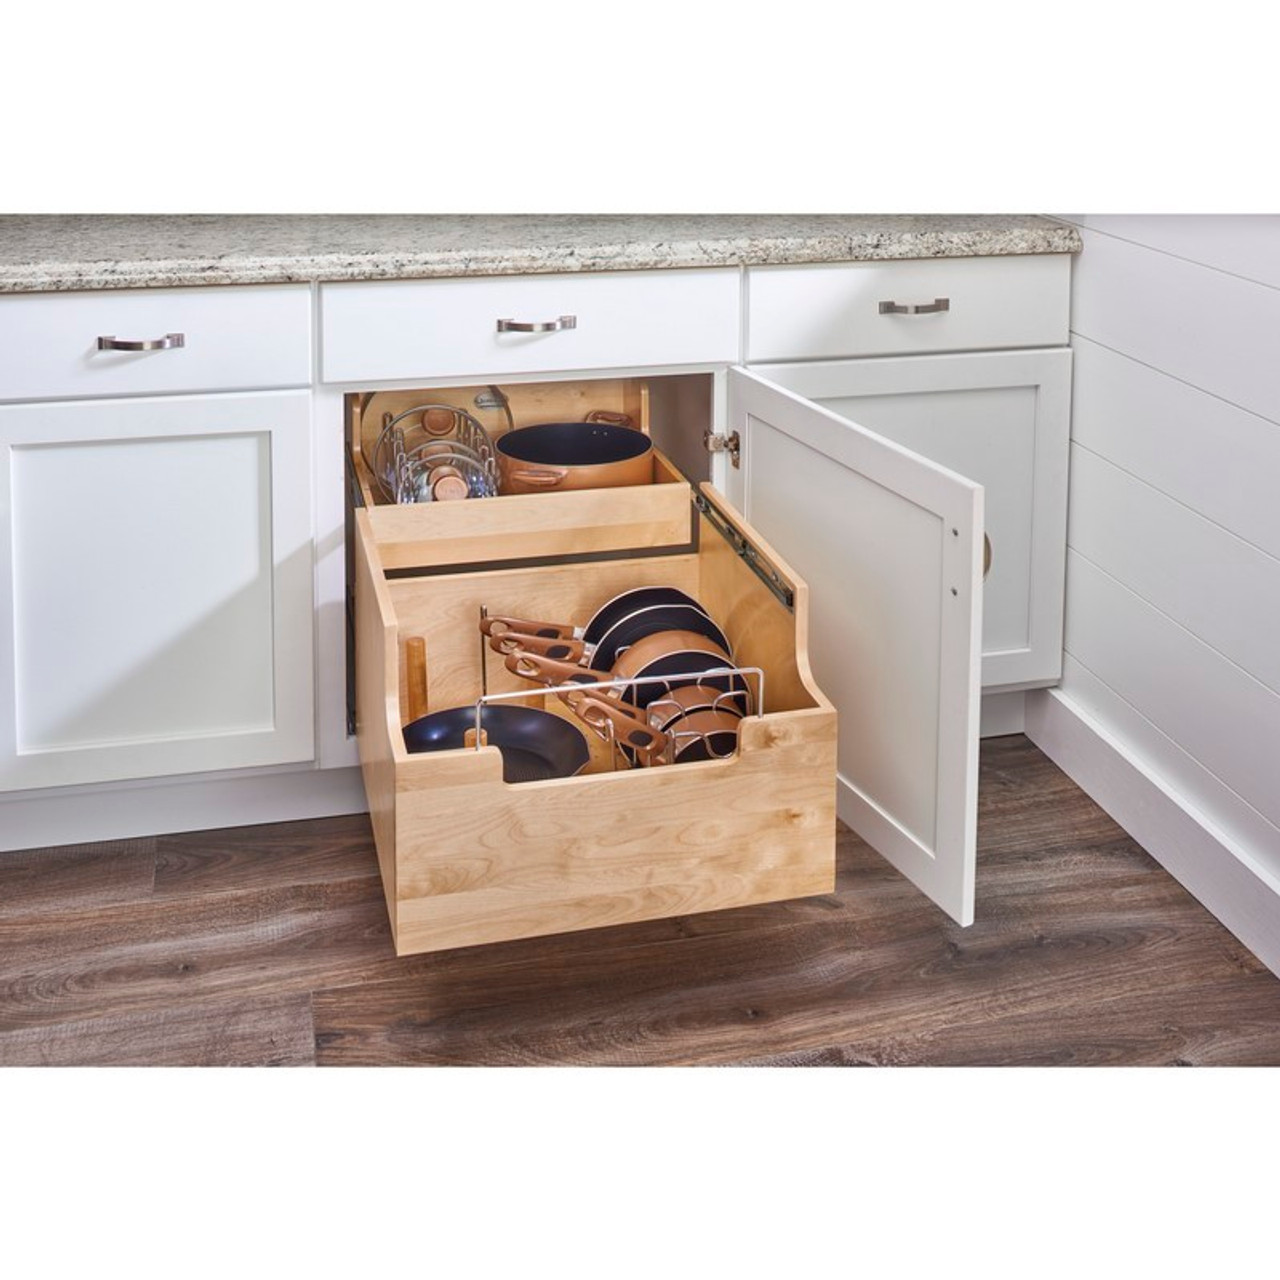 Rev-A-Shelf 18 Divided Storage Bin for Kitchen or Bathroom Cabinets, Food  Storage Containers/Utensils Organizer with Soft Close, Wood, 4FSCO-18SC-1:  Home & Kitchen 